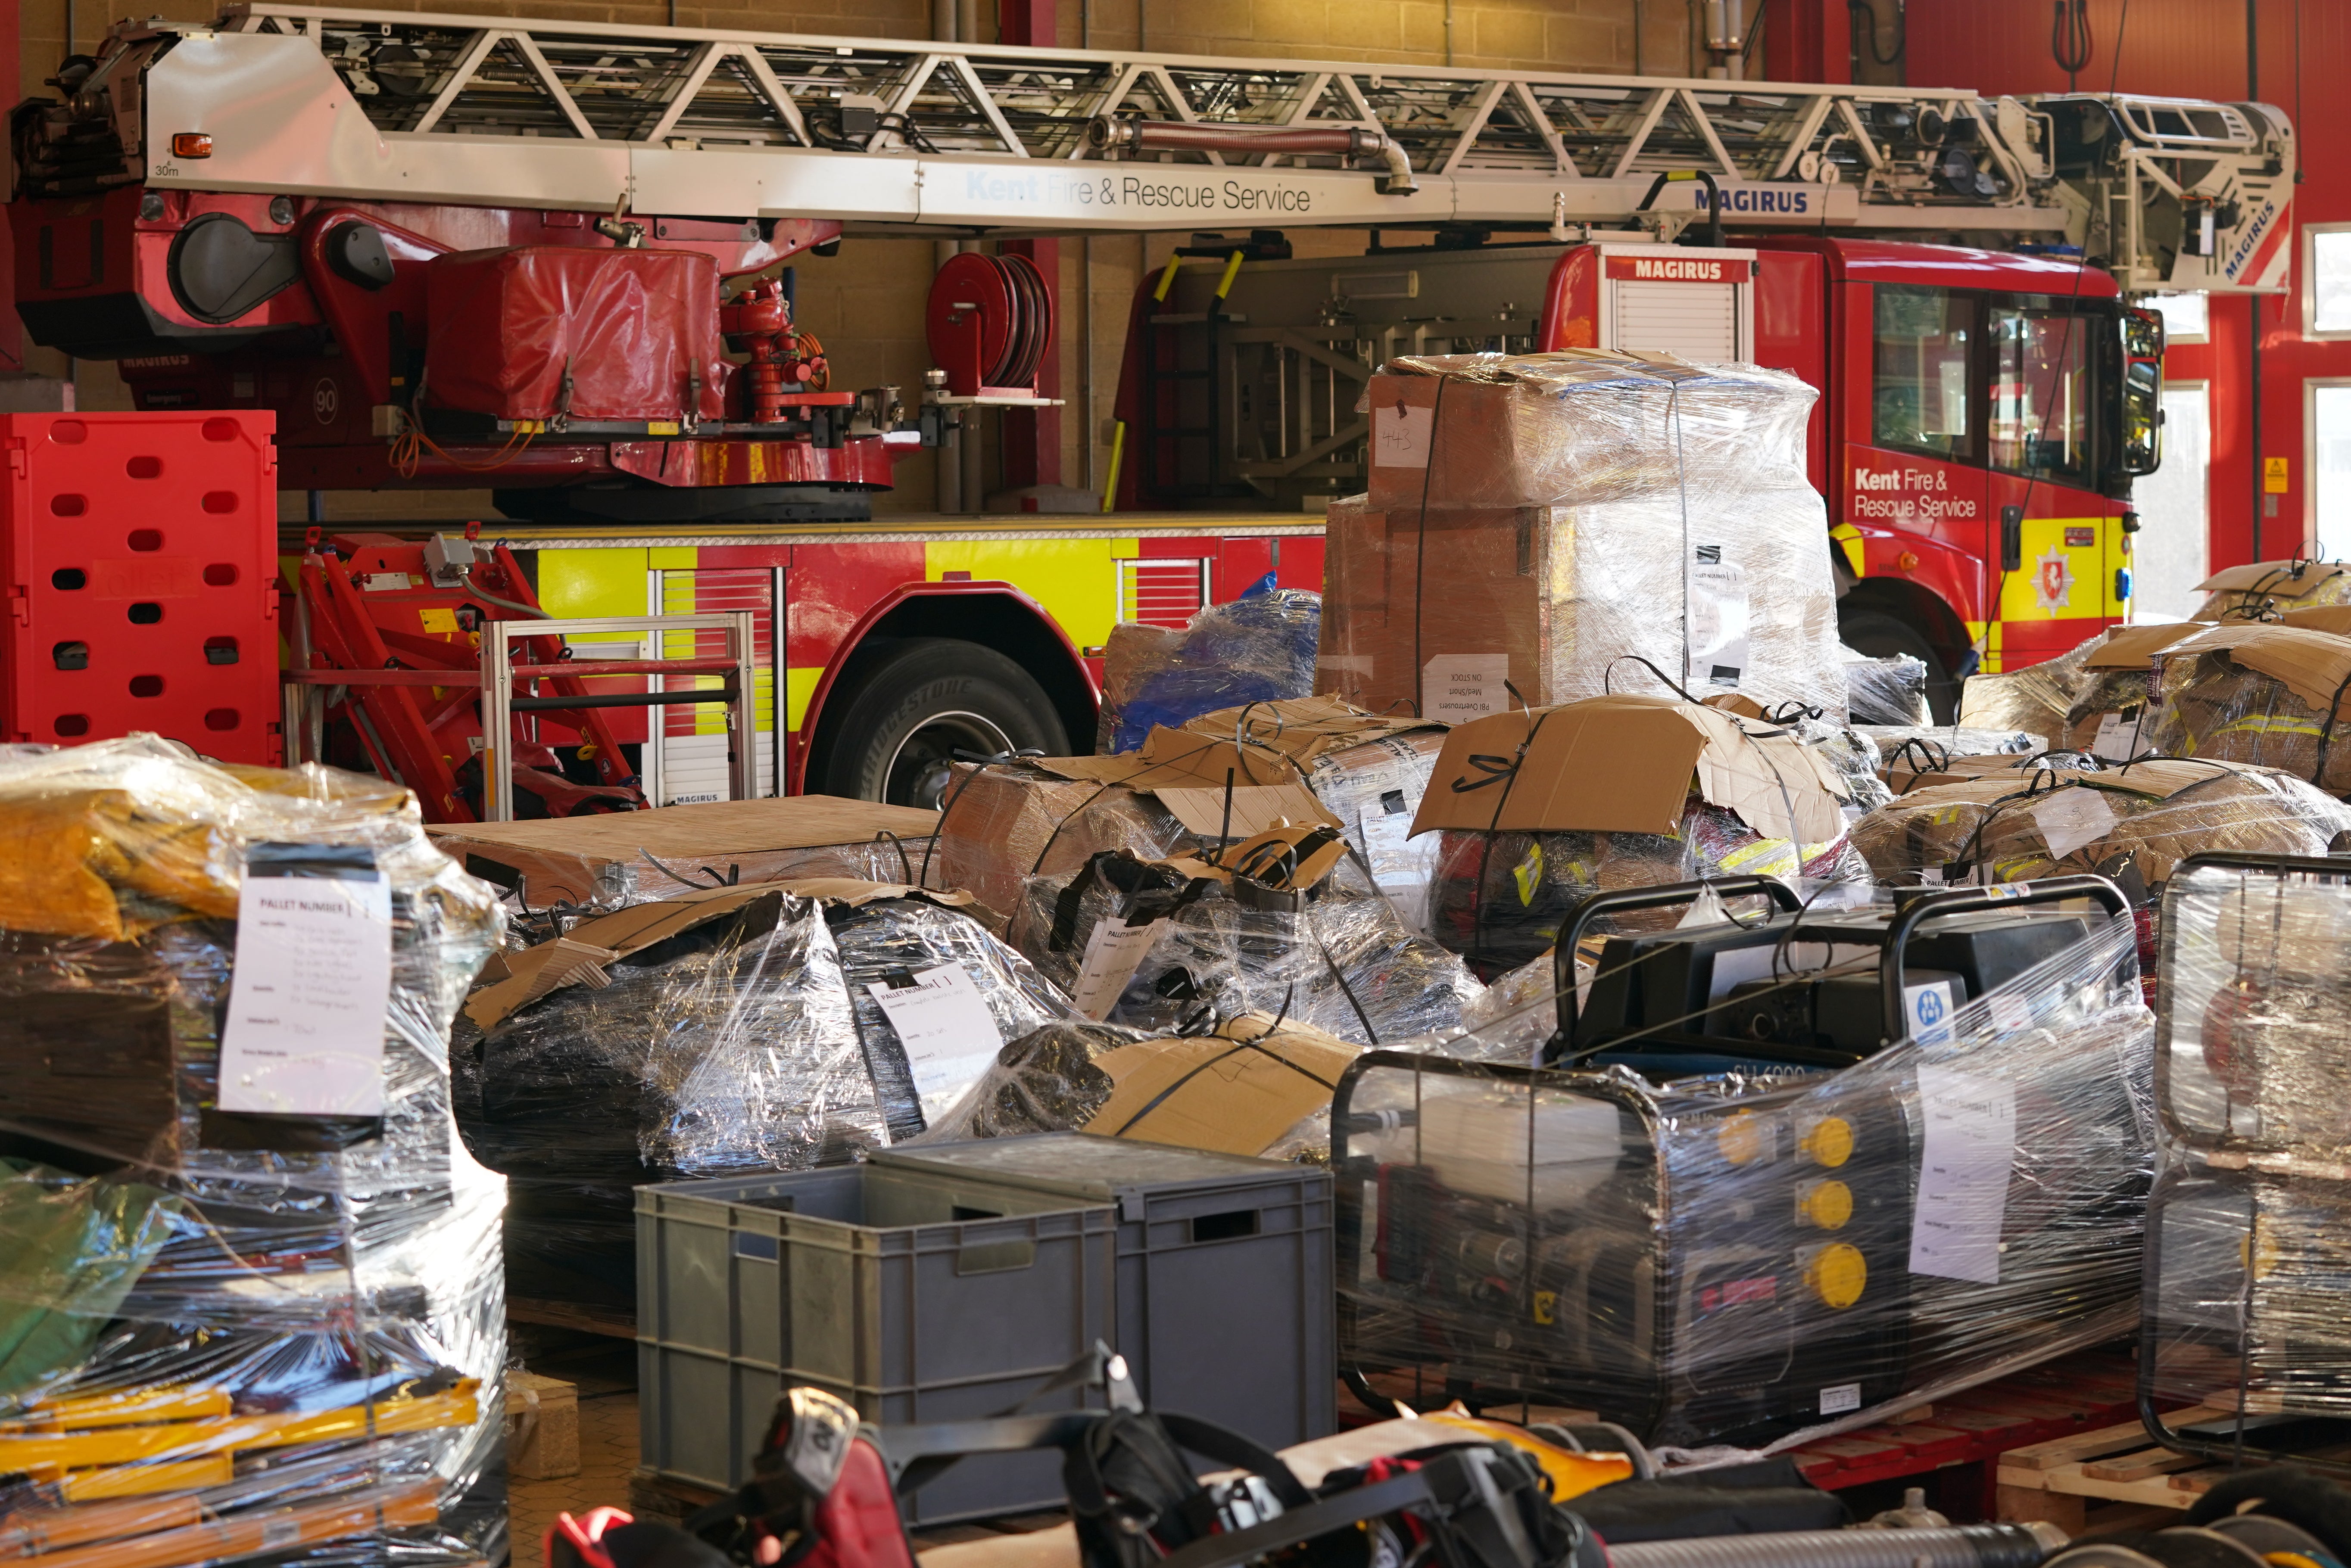 Donated emergency service equipment was loaded at Ashford fire station (Gareth Fuller/PA)